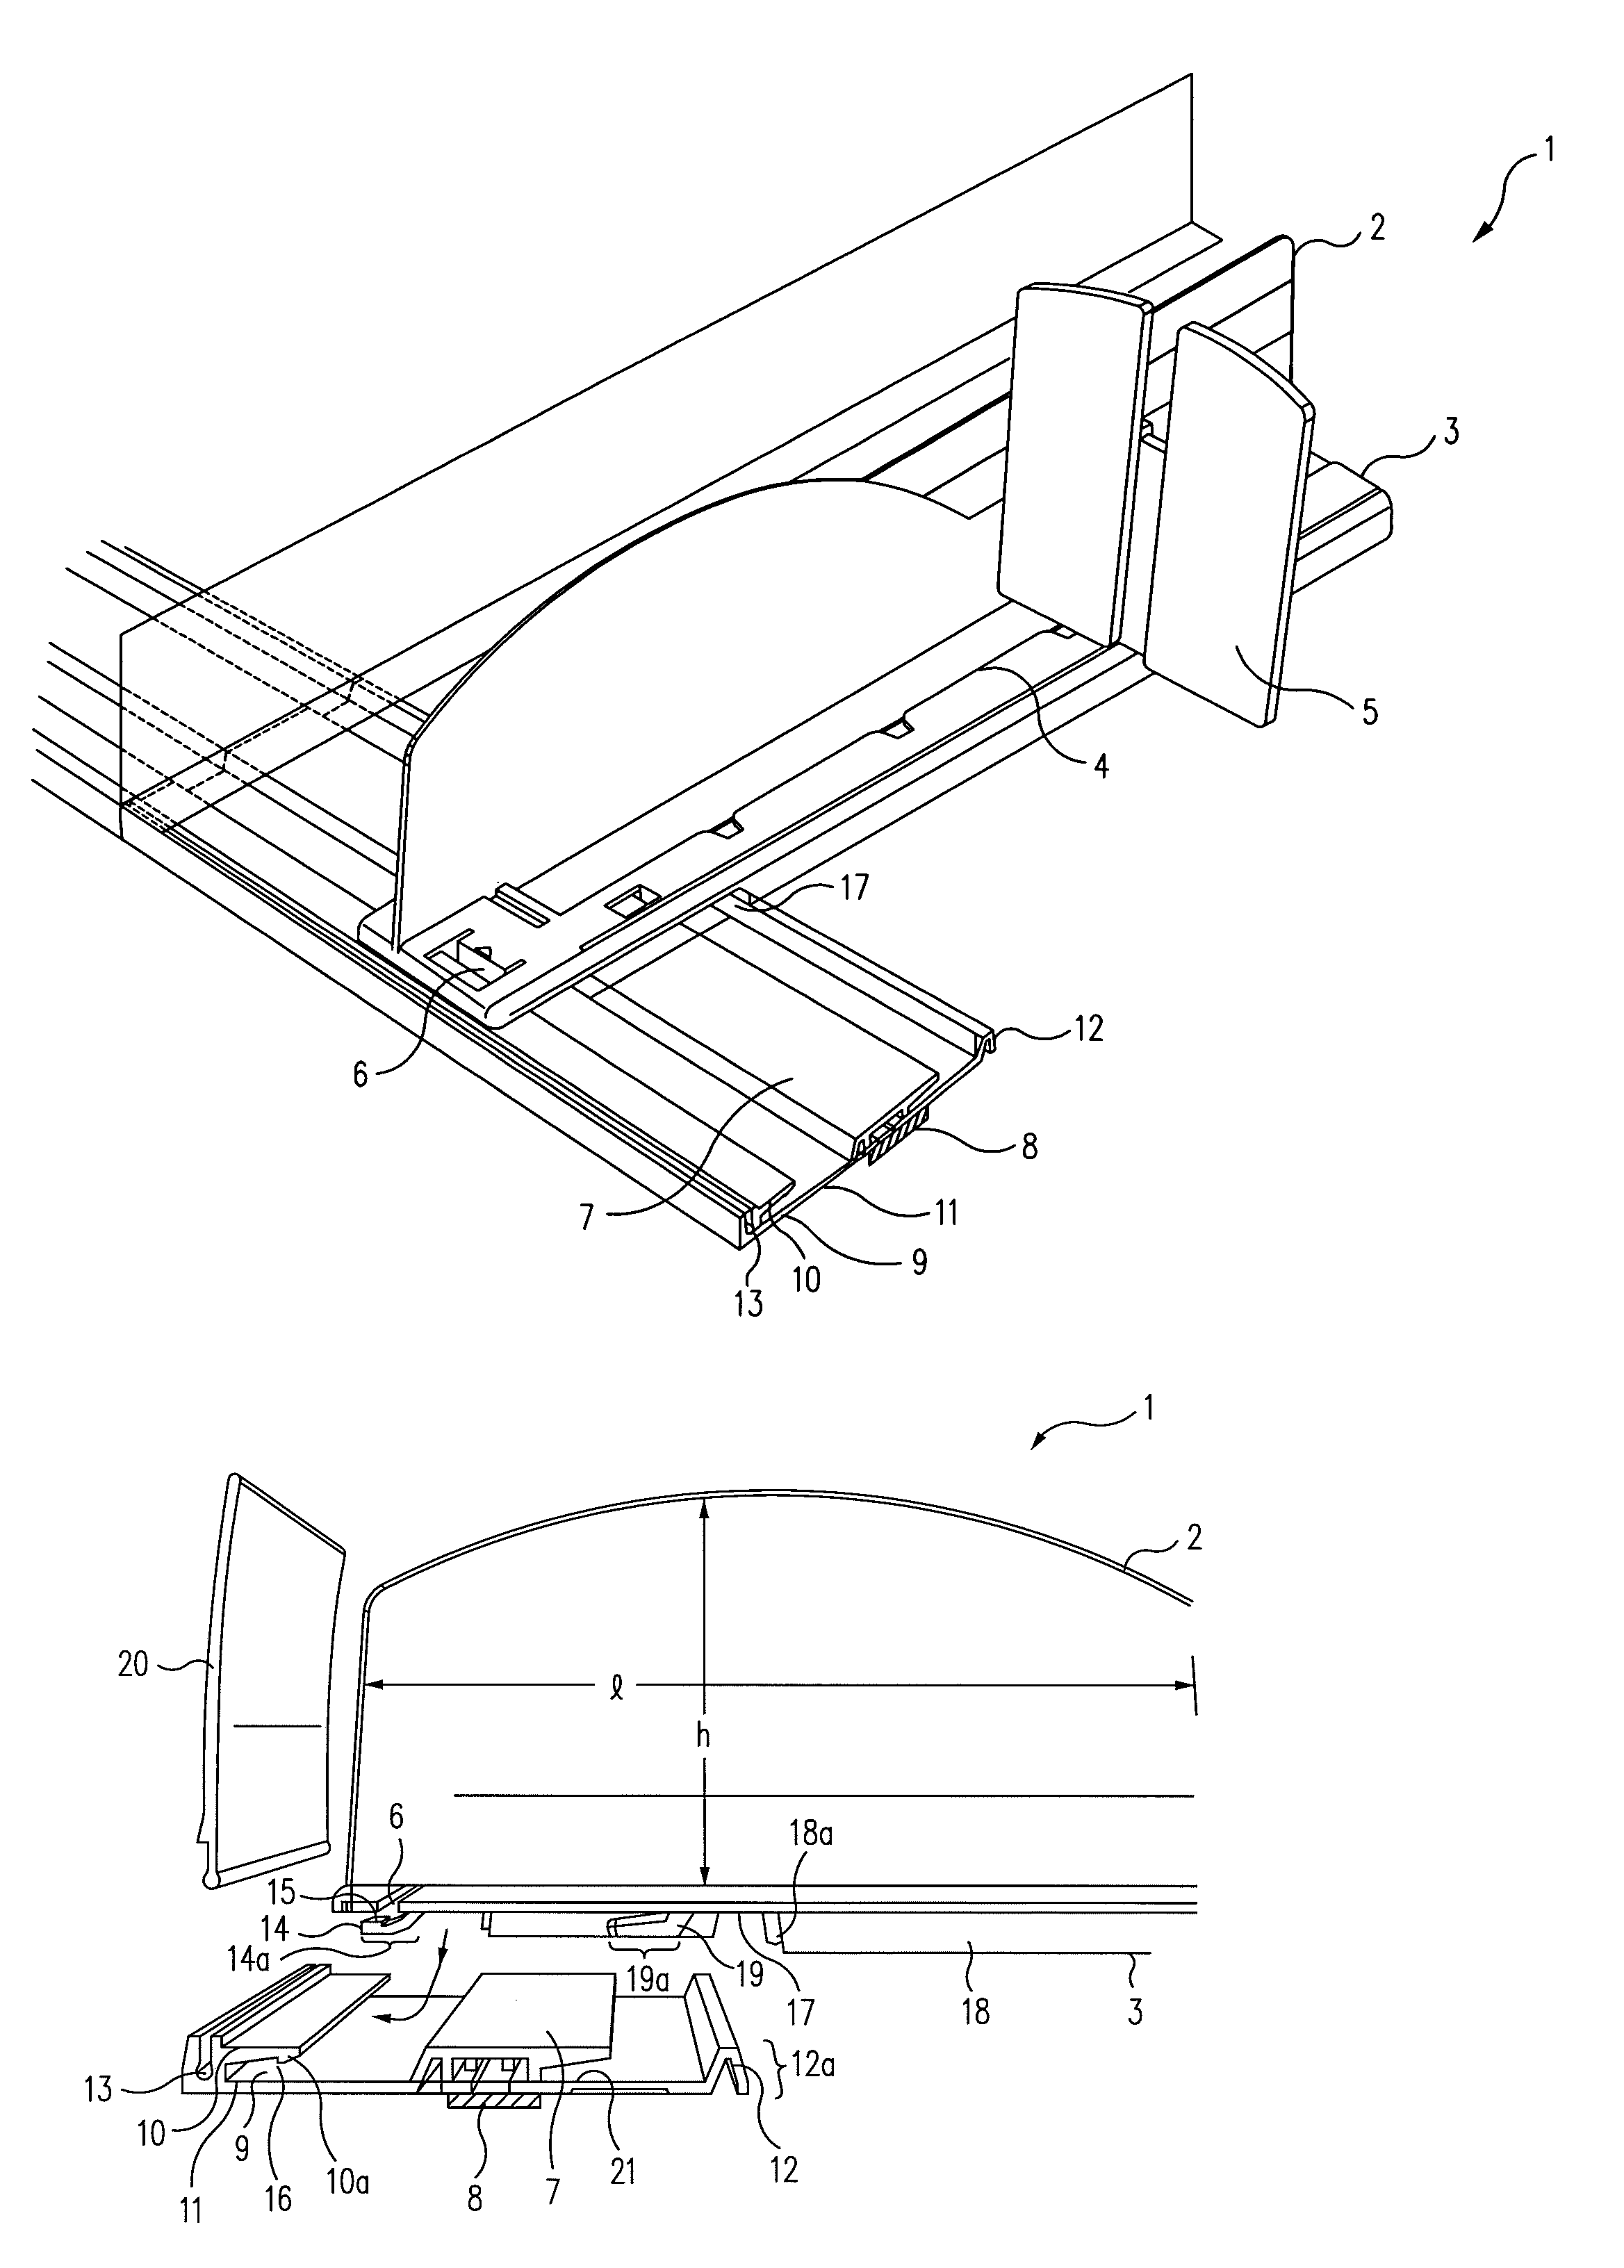 Method and apparatus for selective engagement of shelf divider structures within a shelf management system